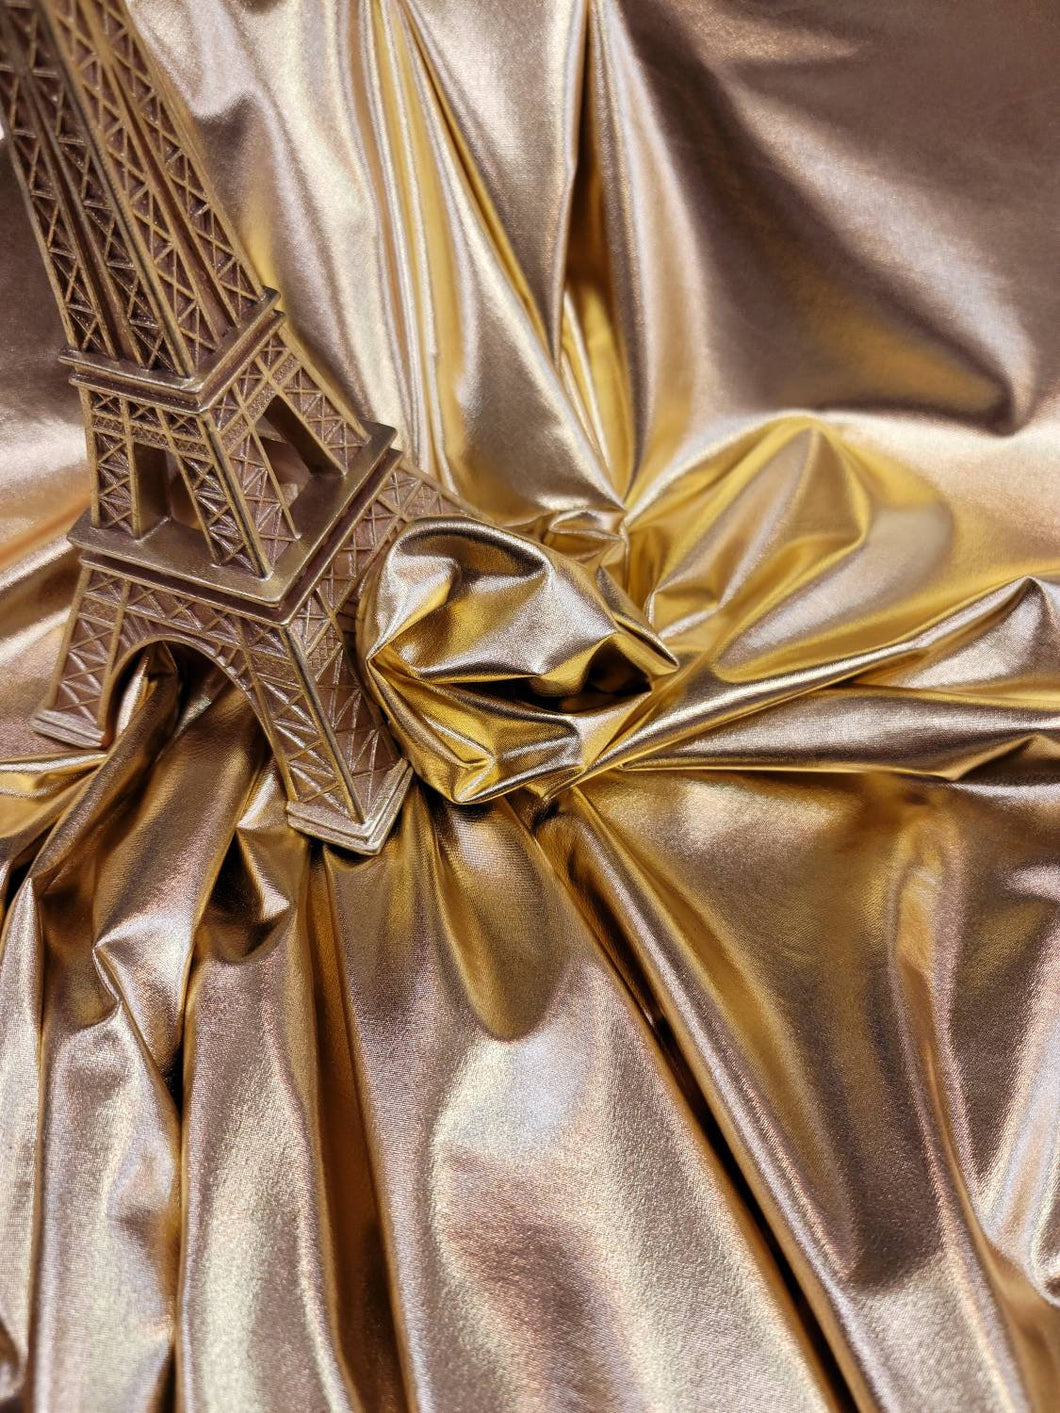 4 Way Stretch Gold Metallic Pleather Spandex Fabric Sold by the Yard Draping Decoration Clothing Dancer Clothing